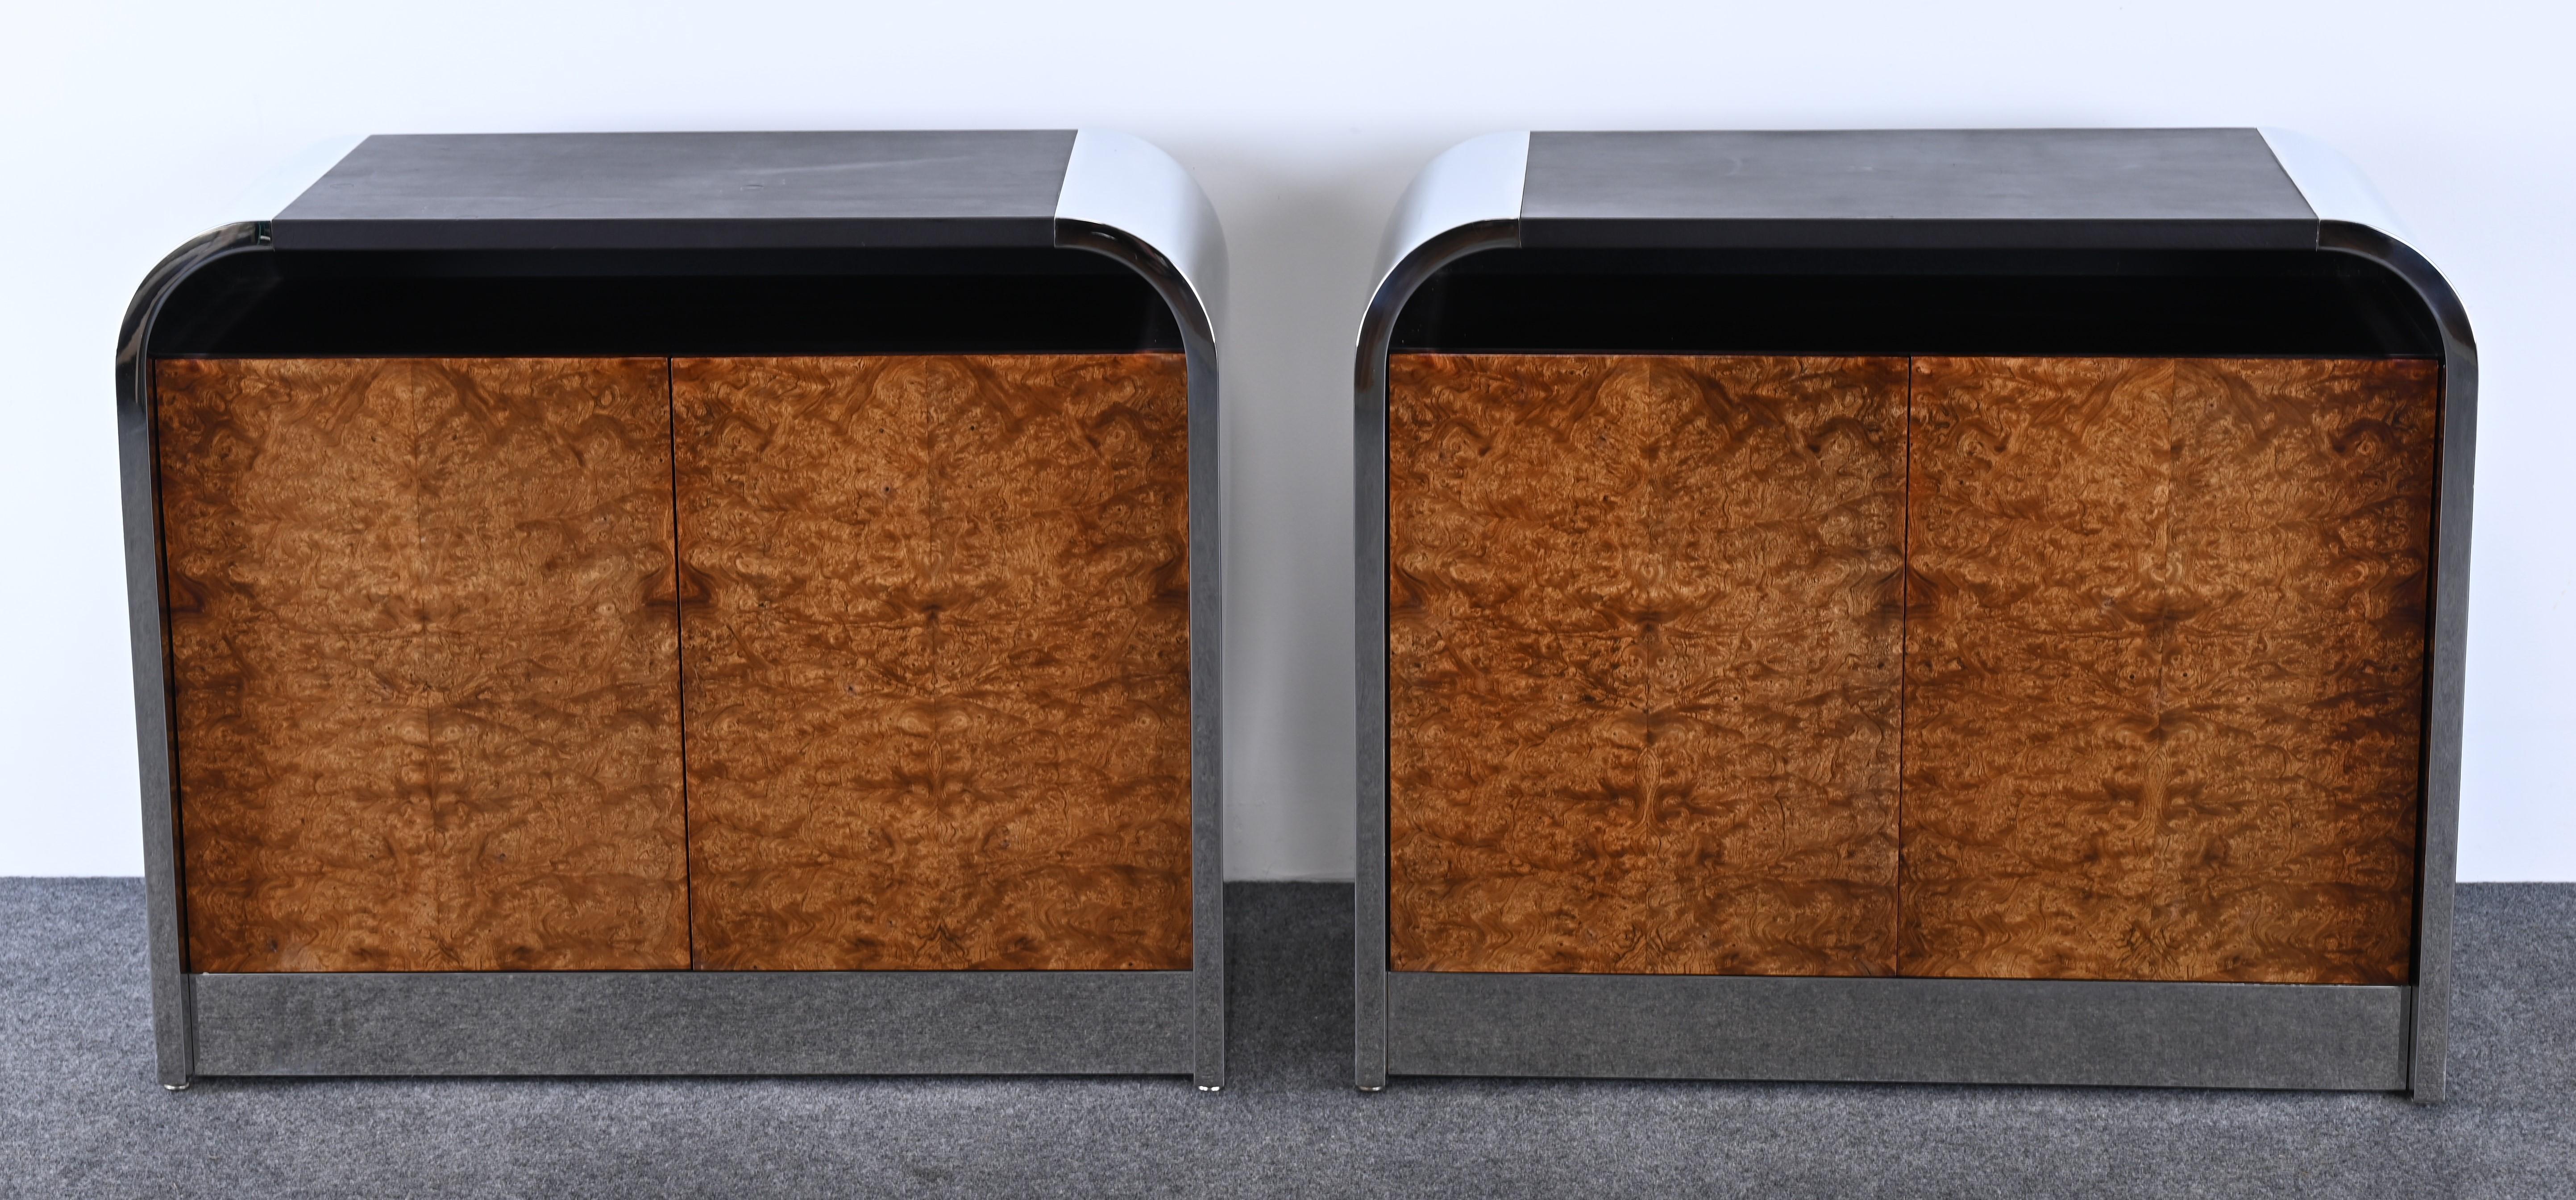 Mid-Century Modern Pair of Custom Stainless Steel and Burl Wood Cabinets by Brueton, 1978